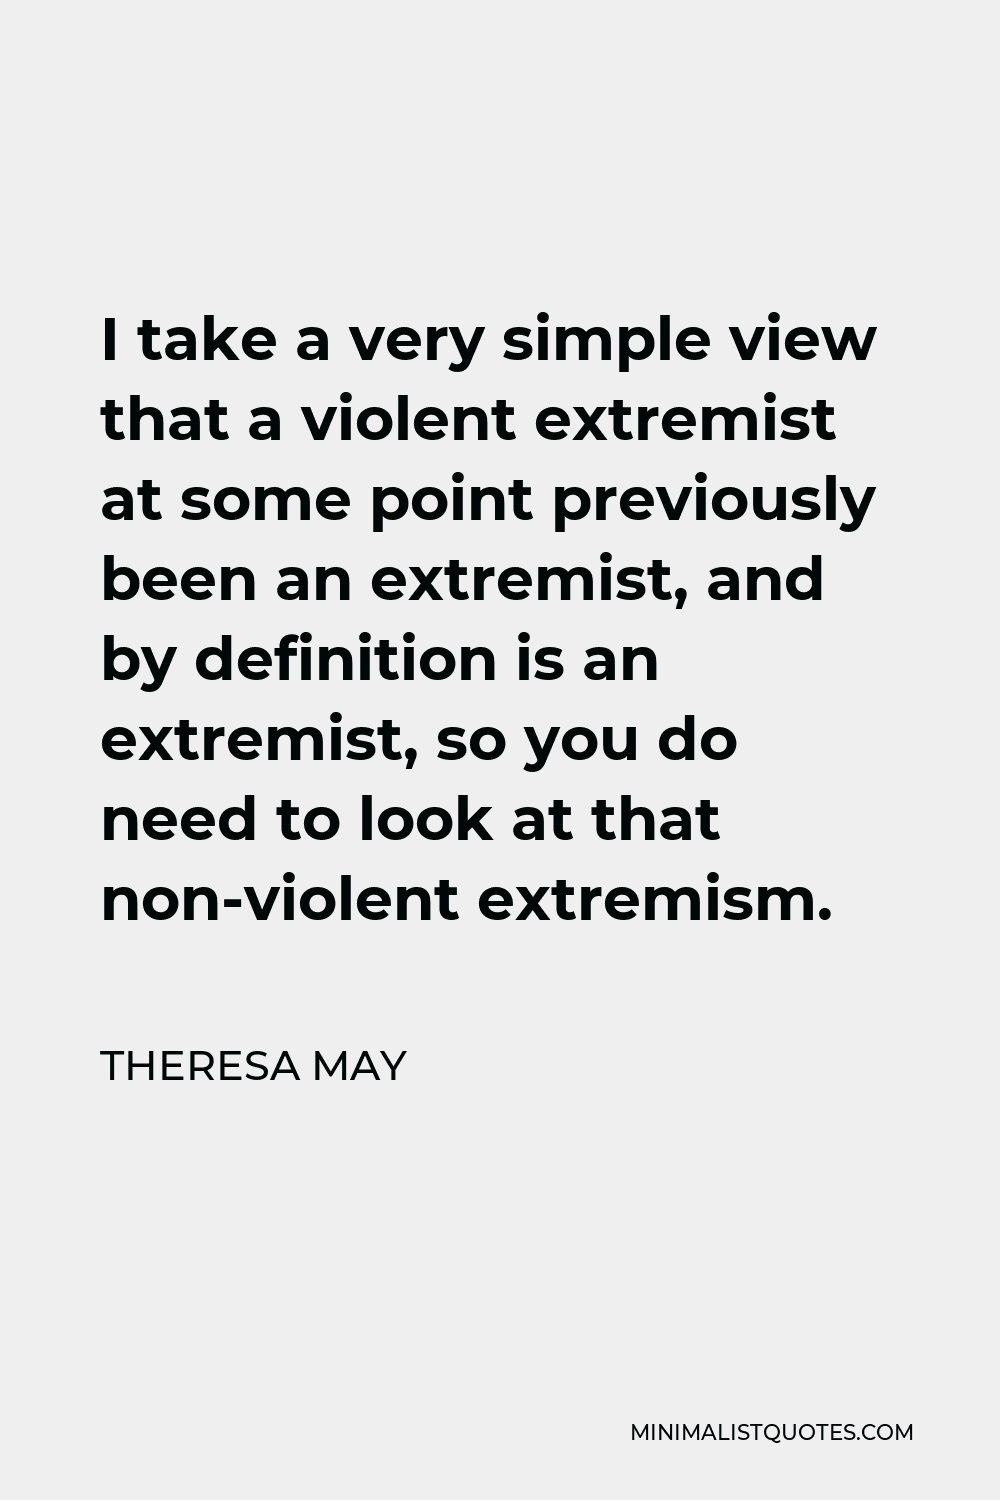 Theresa May Quote - I take a very simple view that a violent extremist at some point previously been an extremist, and by definition is an extremist, so you do need to look at that non-violent extremism.